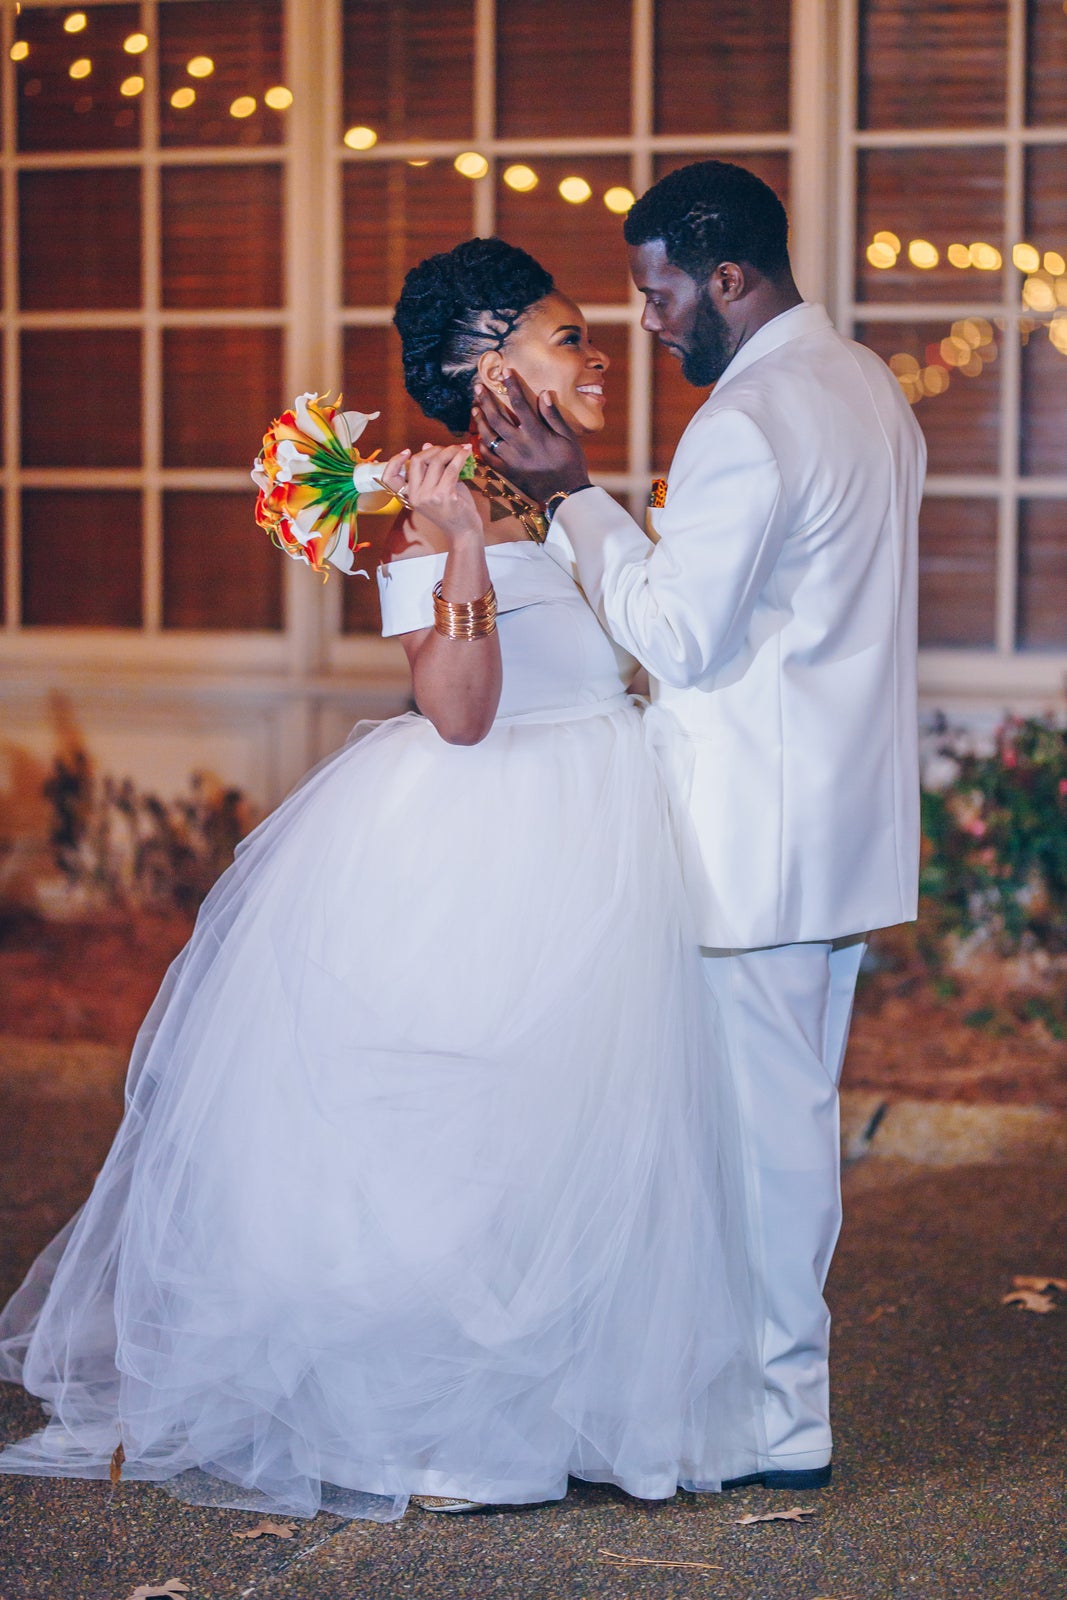 Bridal Bliss: Keedran And Kateshia Celebrated Their Love For The Culture And Each Other On Their Big Day
